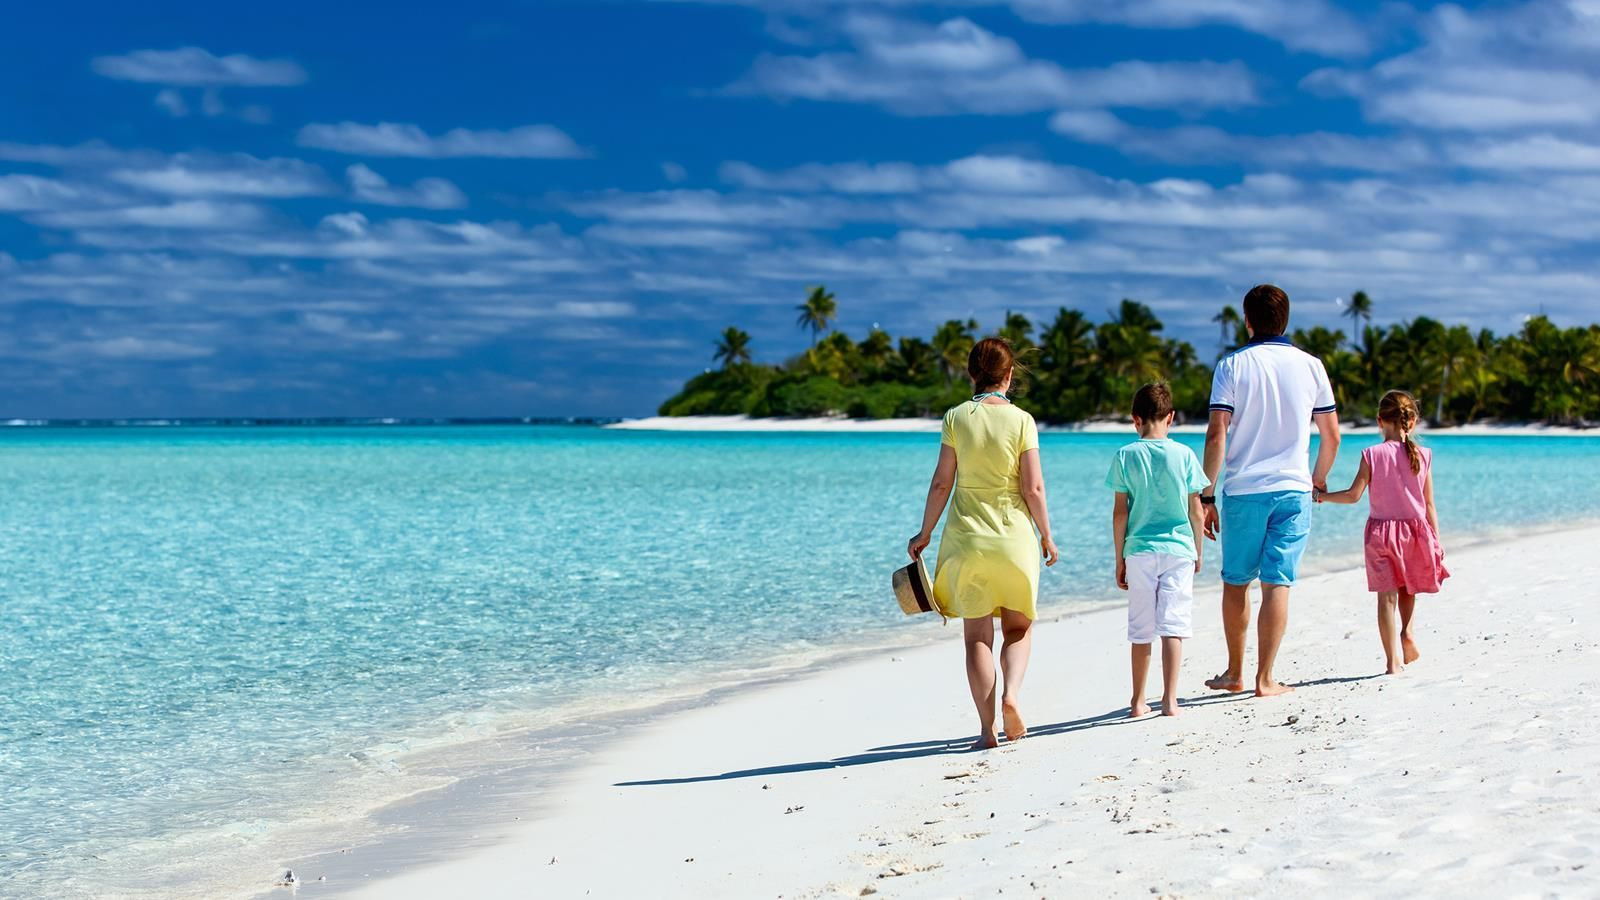 Maldives is a Safe Haven for Your Post Lockdown Travel. Here's 6 Reasons Why